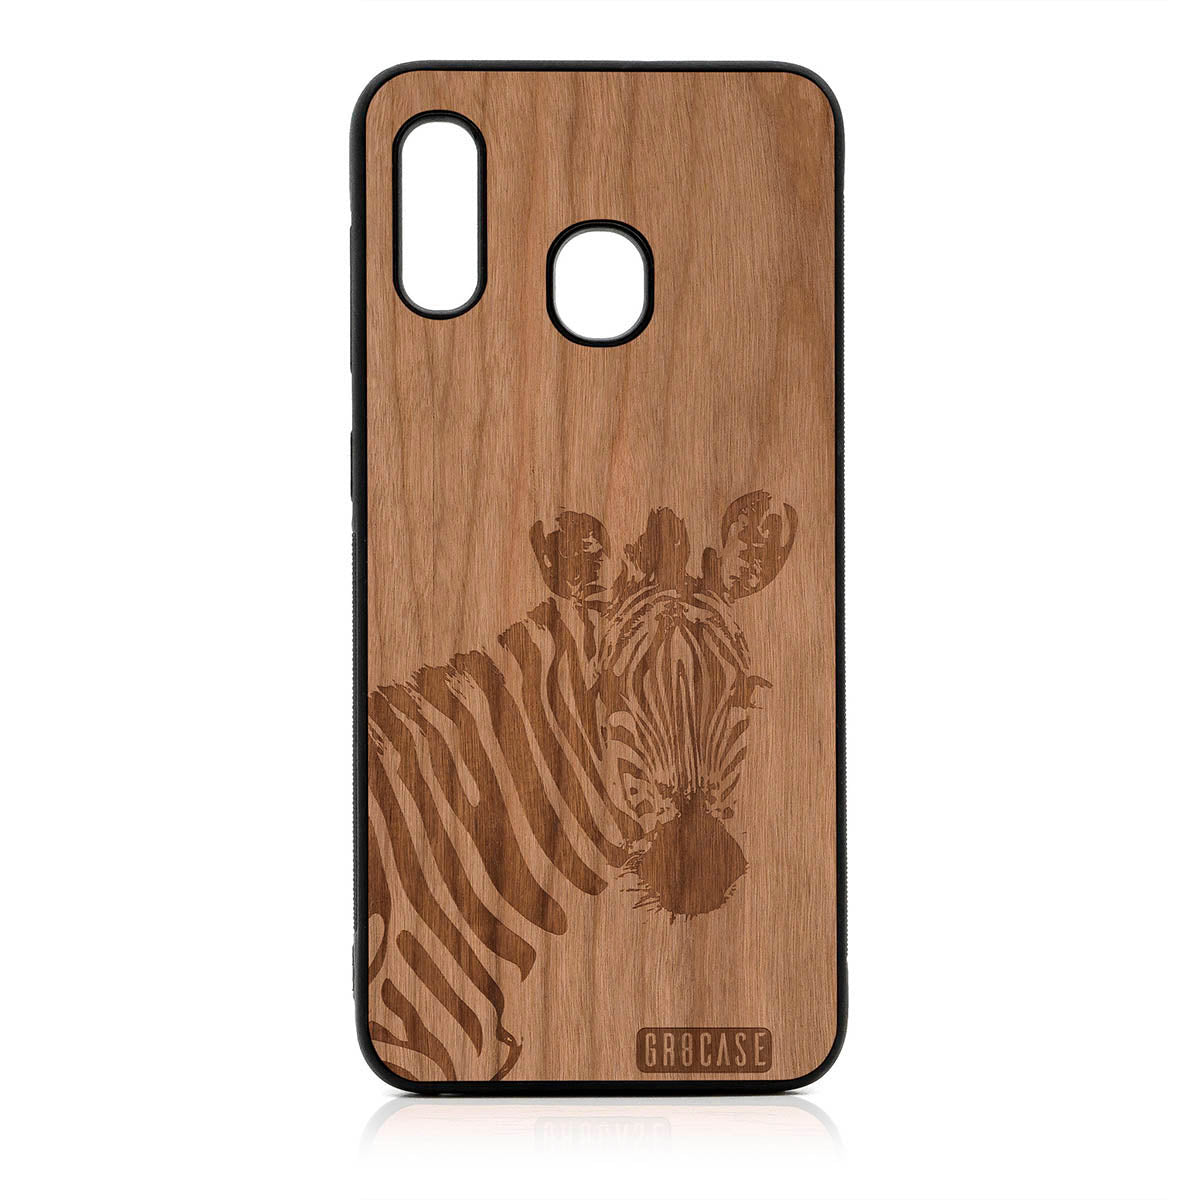 Lookout Zebra Design Wood Case For Samsung Galaxy A20